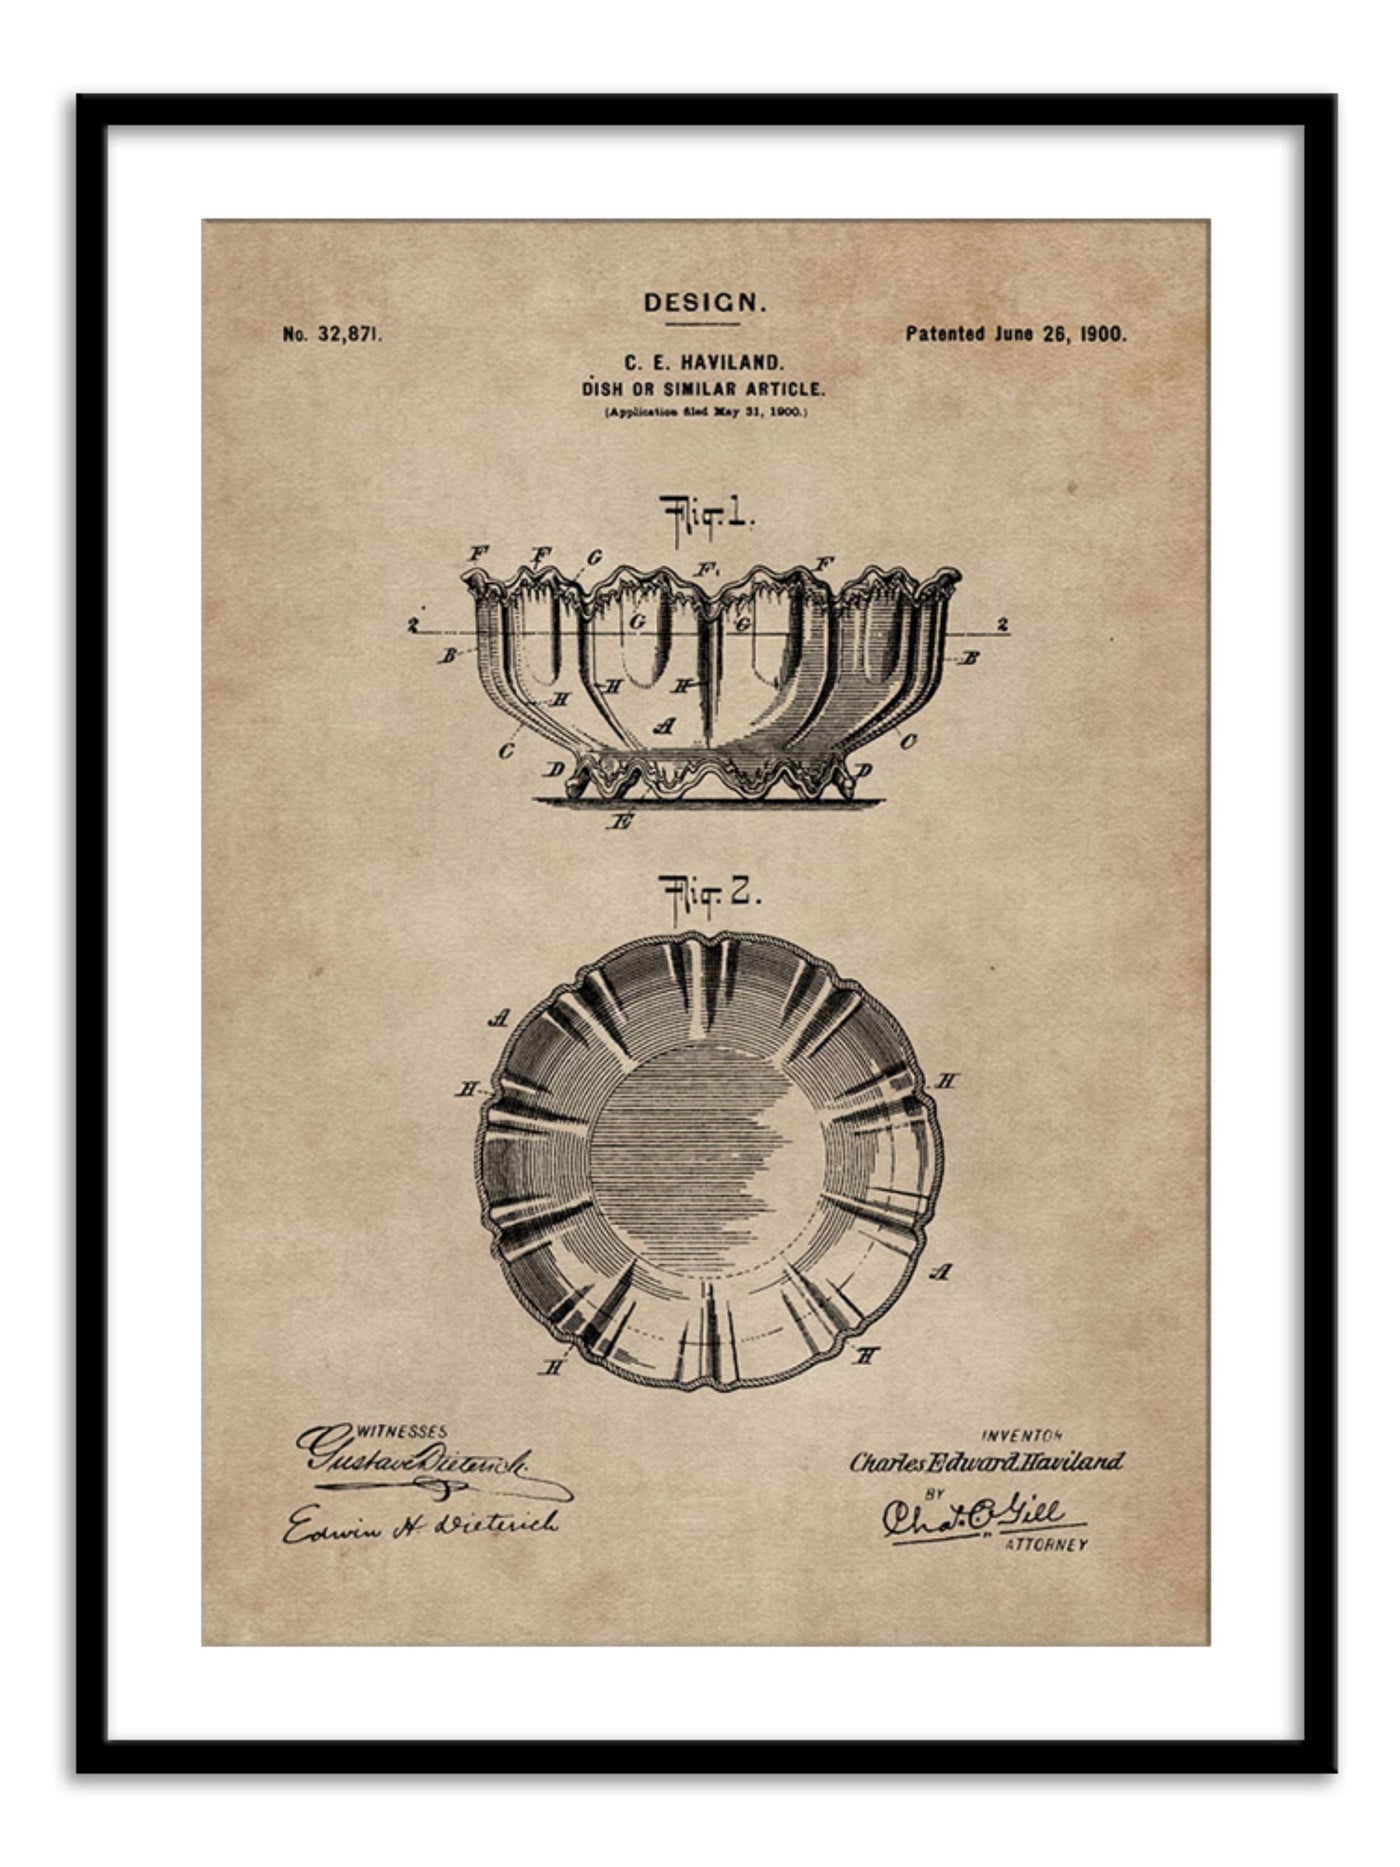 Patent Document of a Dish Wall Prints